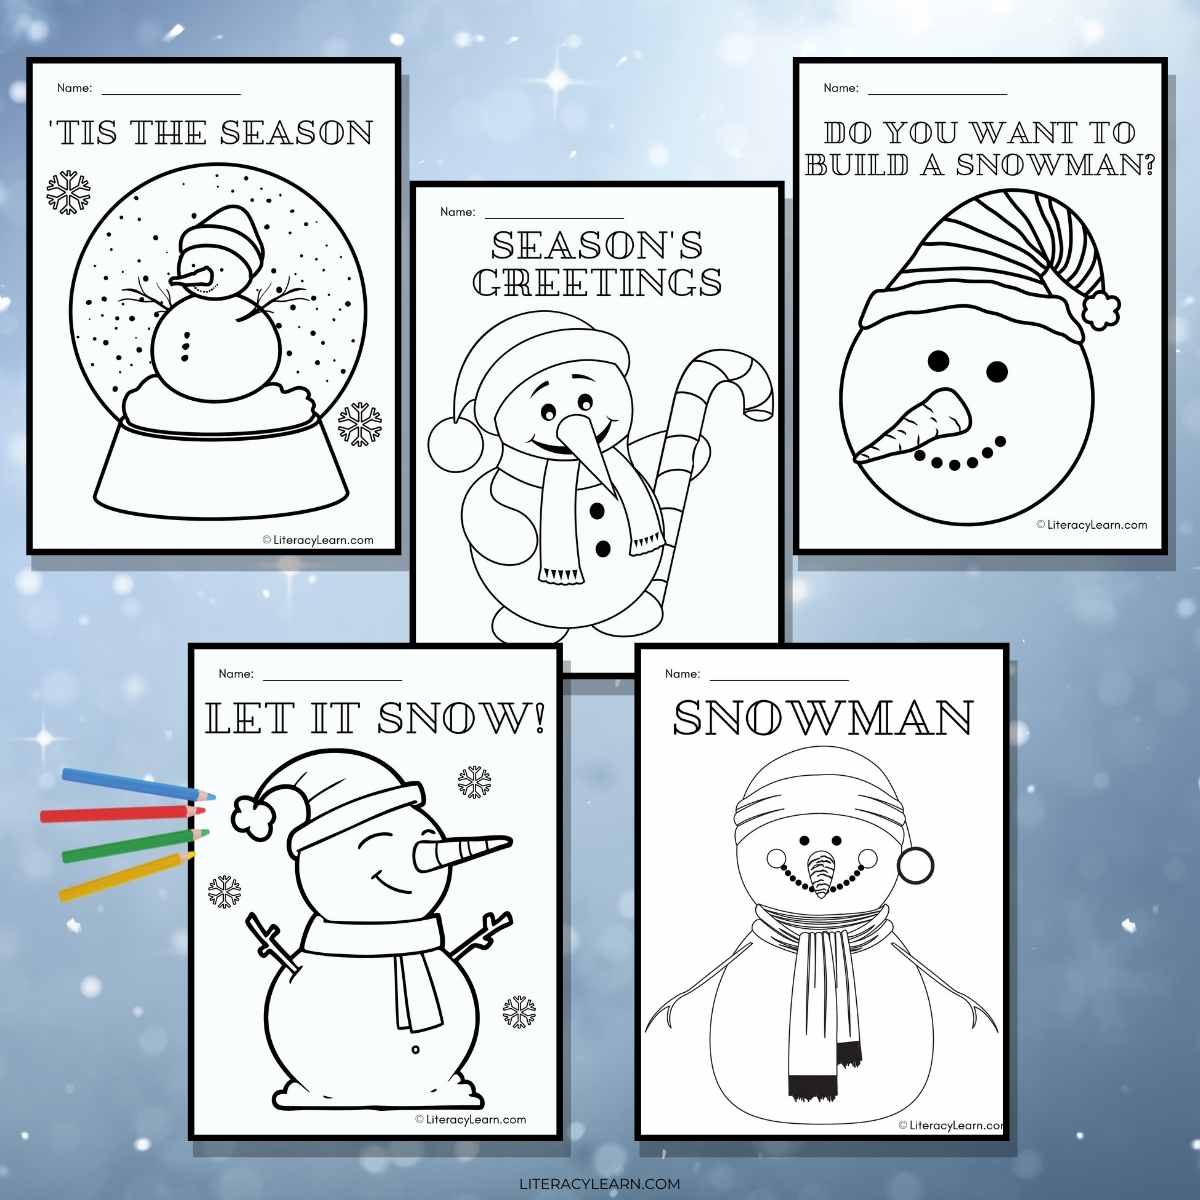 Graphic showing five snowman coloring sheets on a starry blue background.